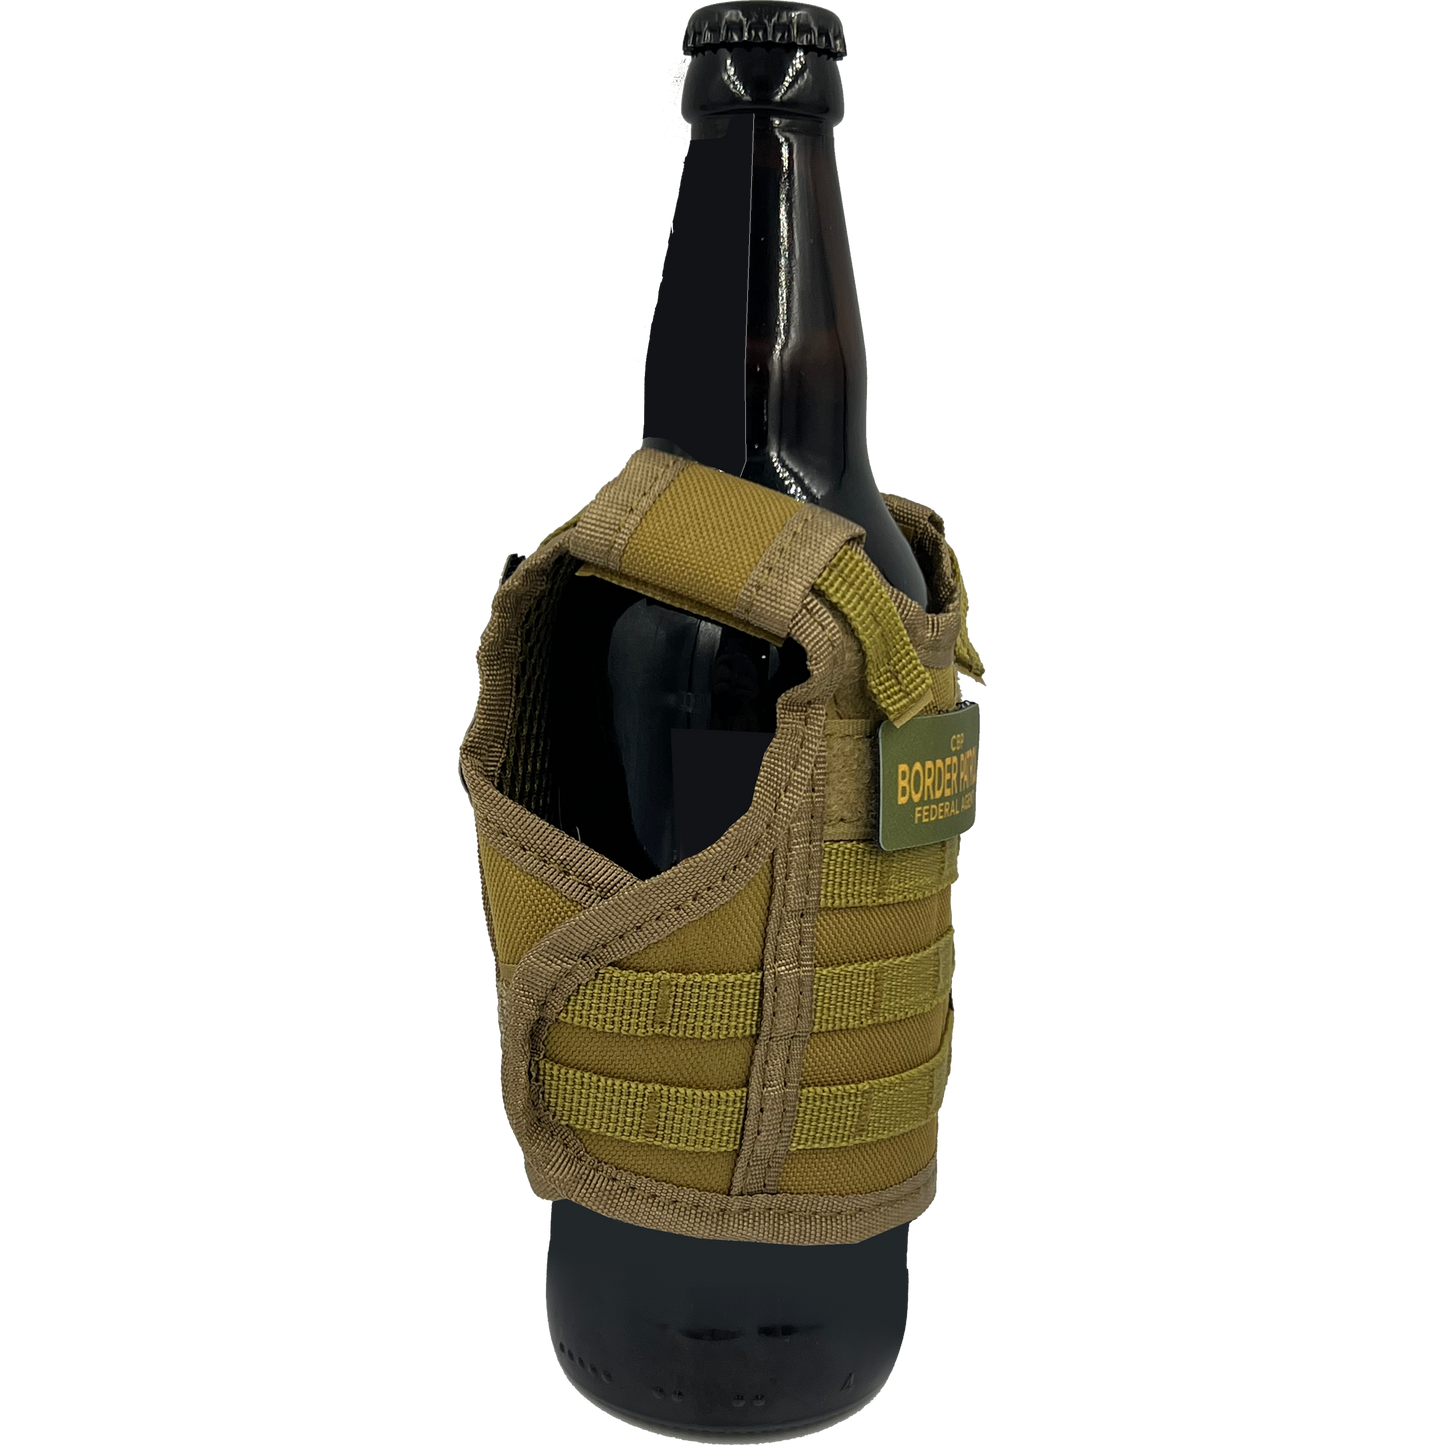 BRB-002-A Border Patrol Agent Tactical Beverage Bottle or Can Cooler Vest CBP BPA with removable patches perfect gift for Challenge Coin collectors